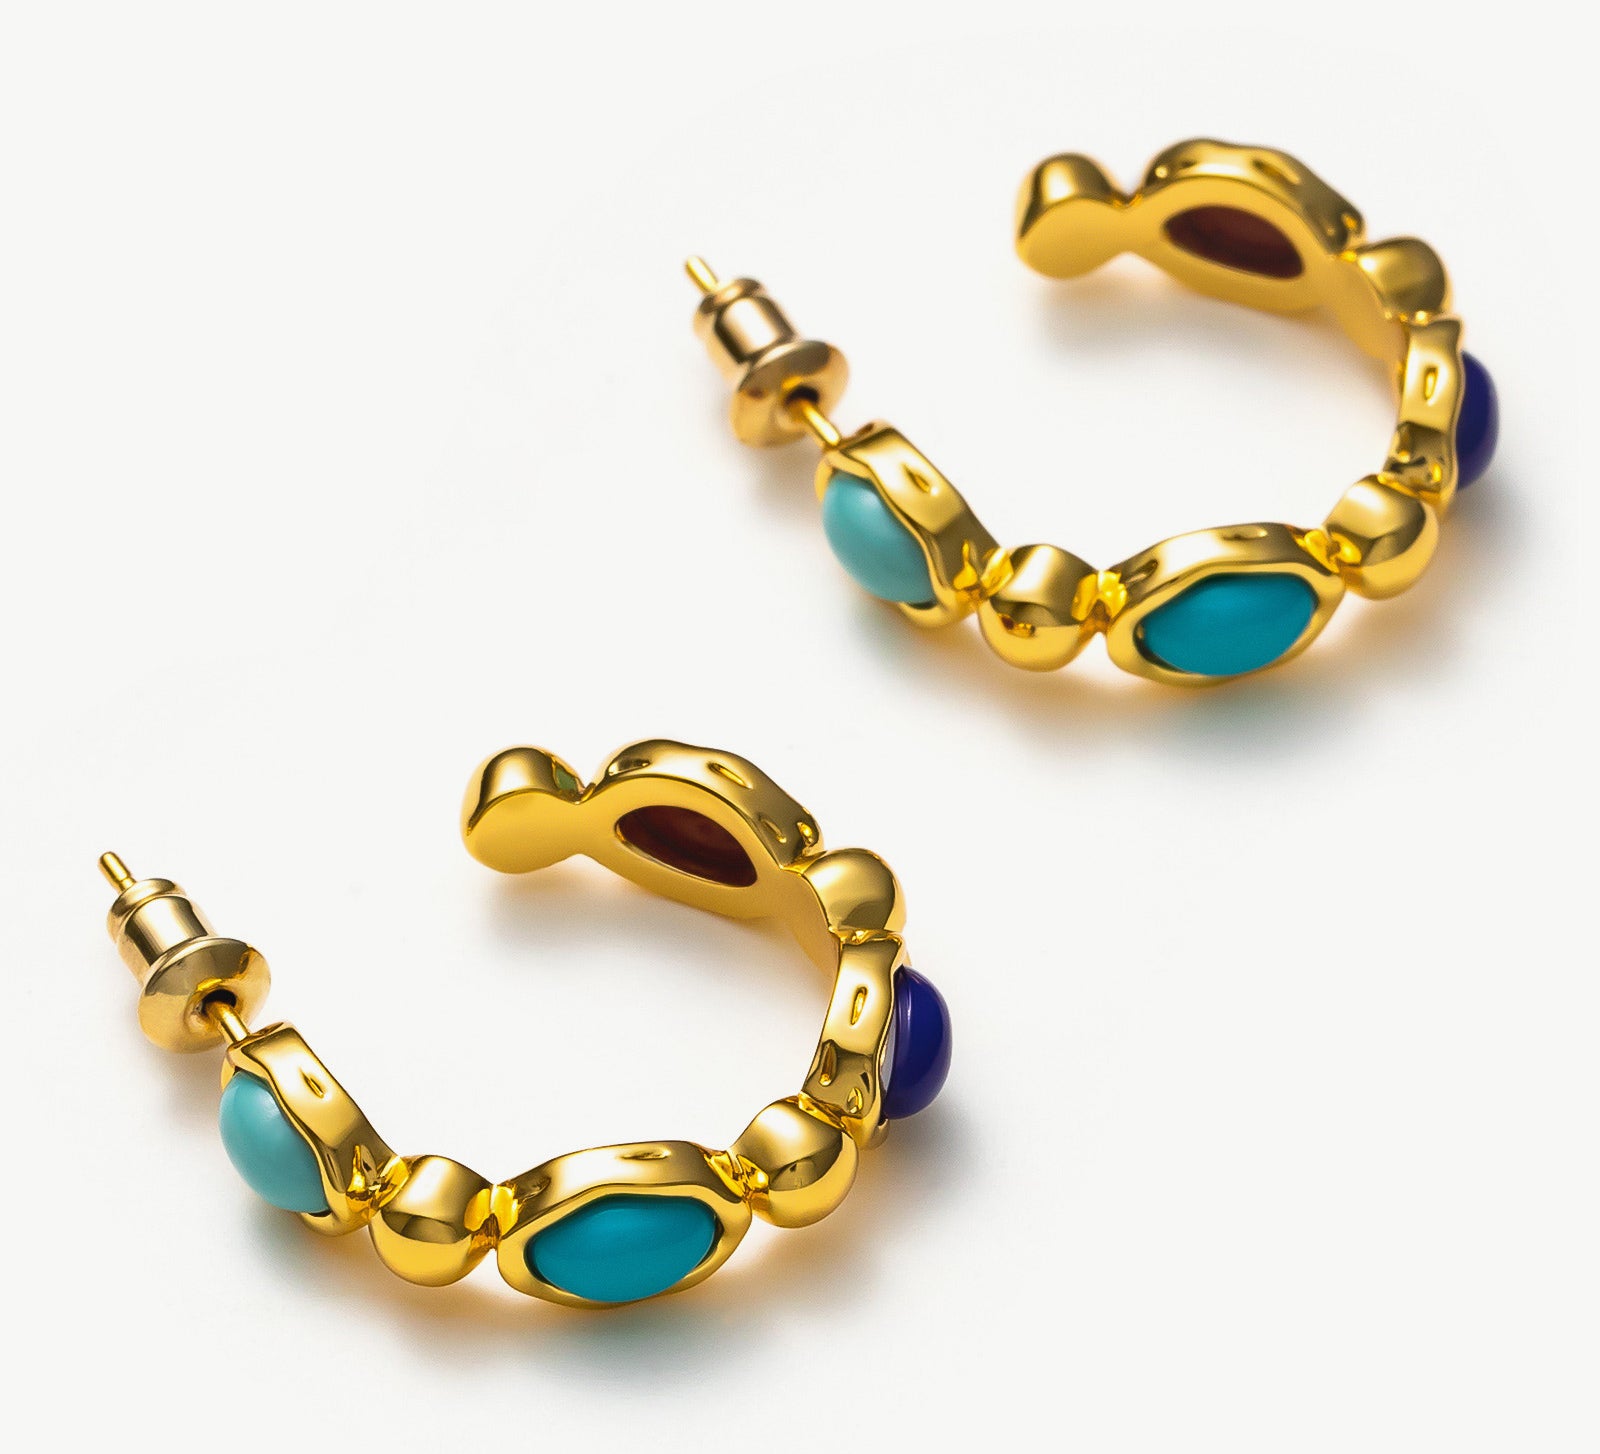 Medium Hoop Earrings featuring a medley of vivid gemstones, radiating a captivating and dynamic aura that adds flair to your ensemble